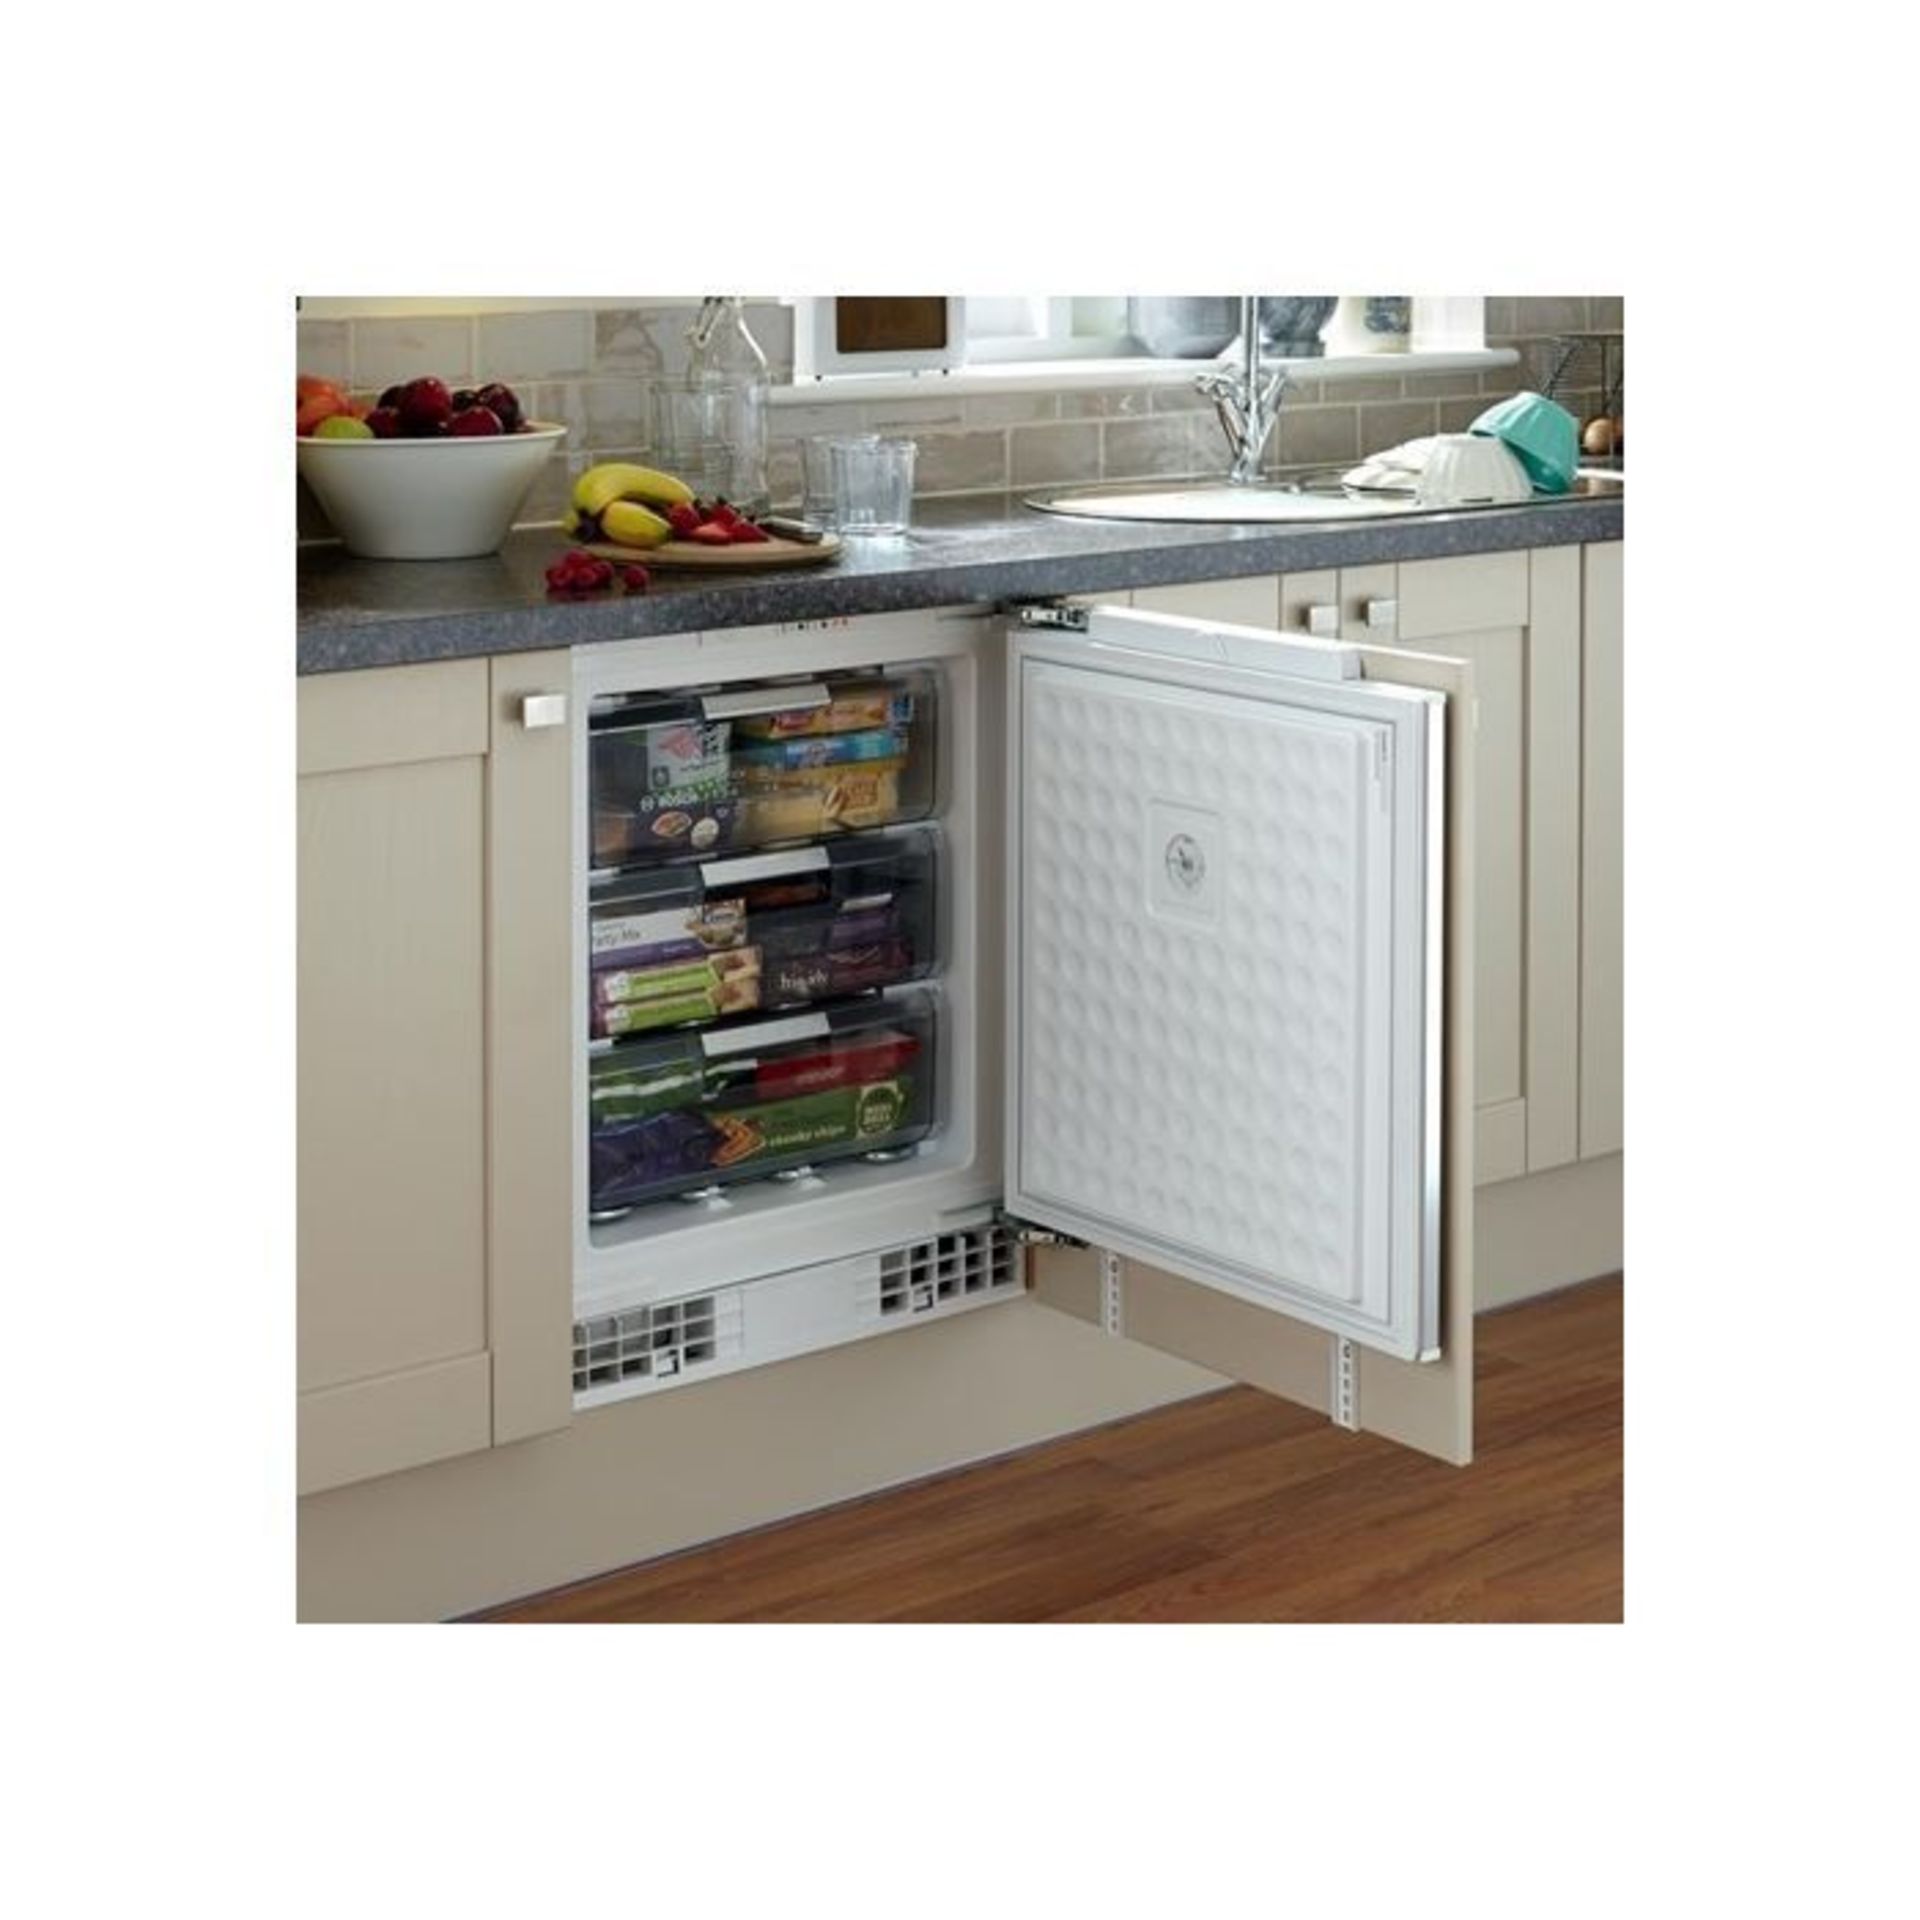 Bosch GUD15AFF0G Built Under Freezer. - H/S. RRP £649.00. Adding new food to the freezer raises - Image 2 of 2